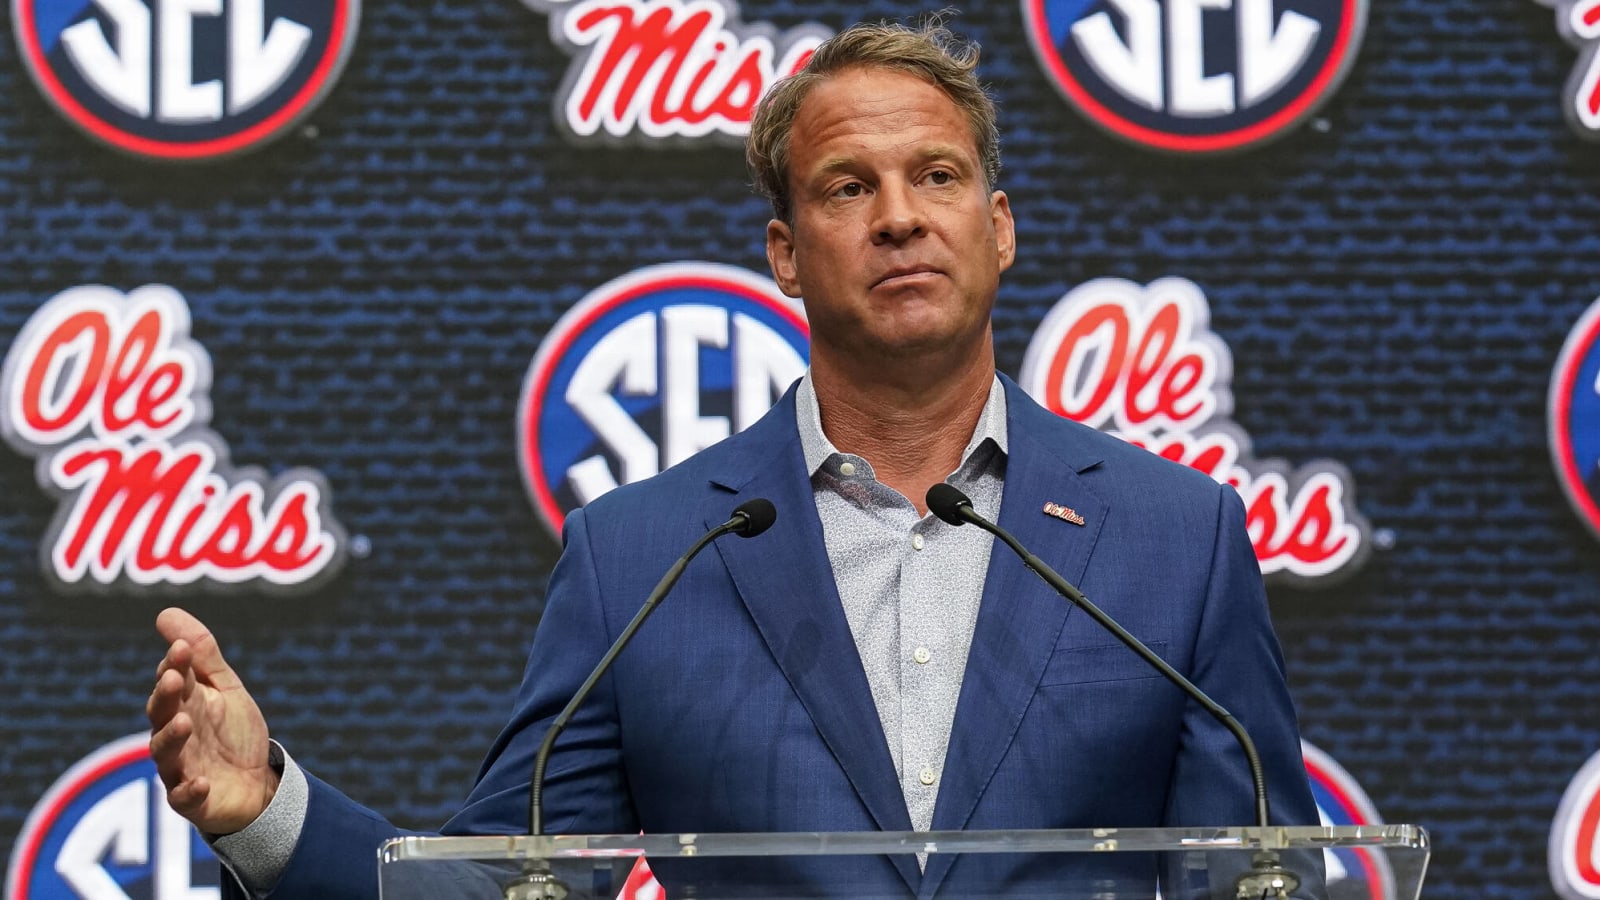 Lane Kiffin had amazing quote about how Ole Miss found its punter